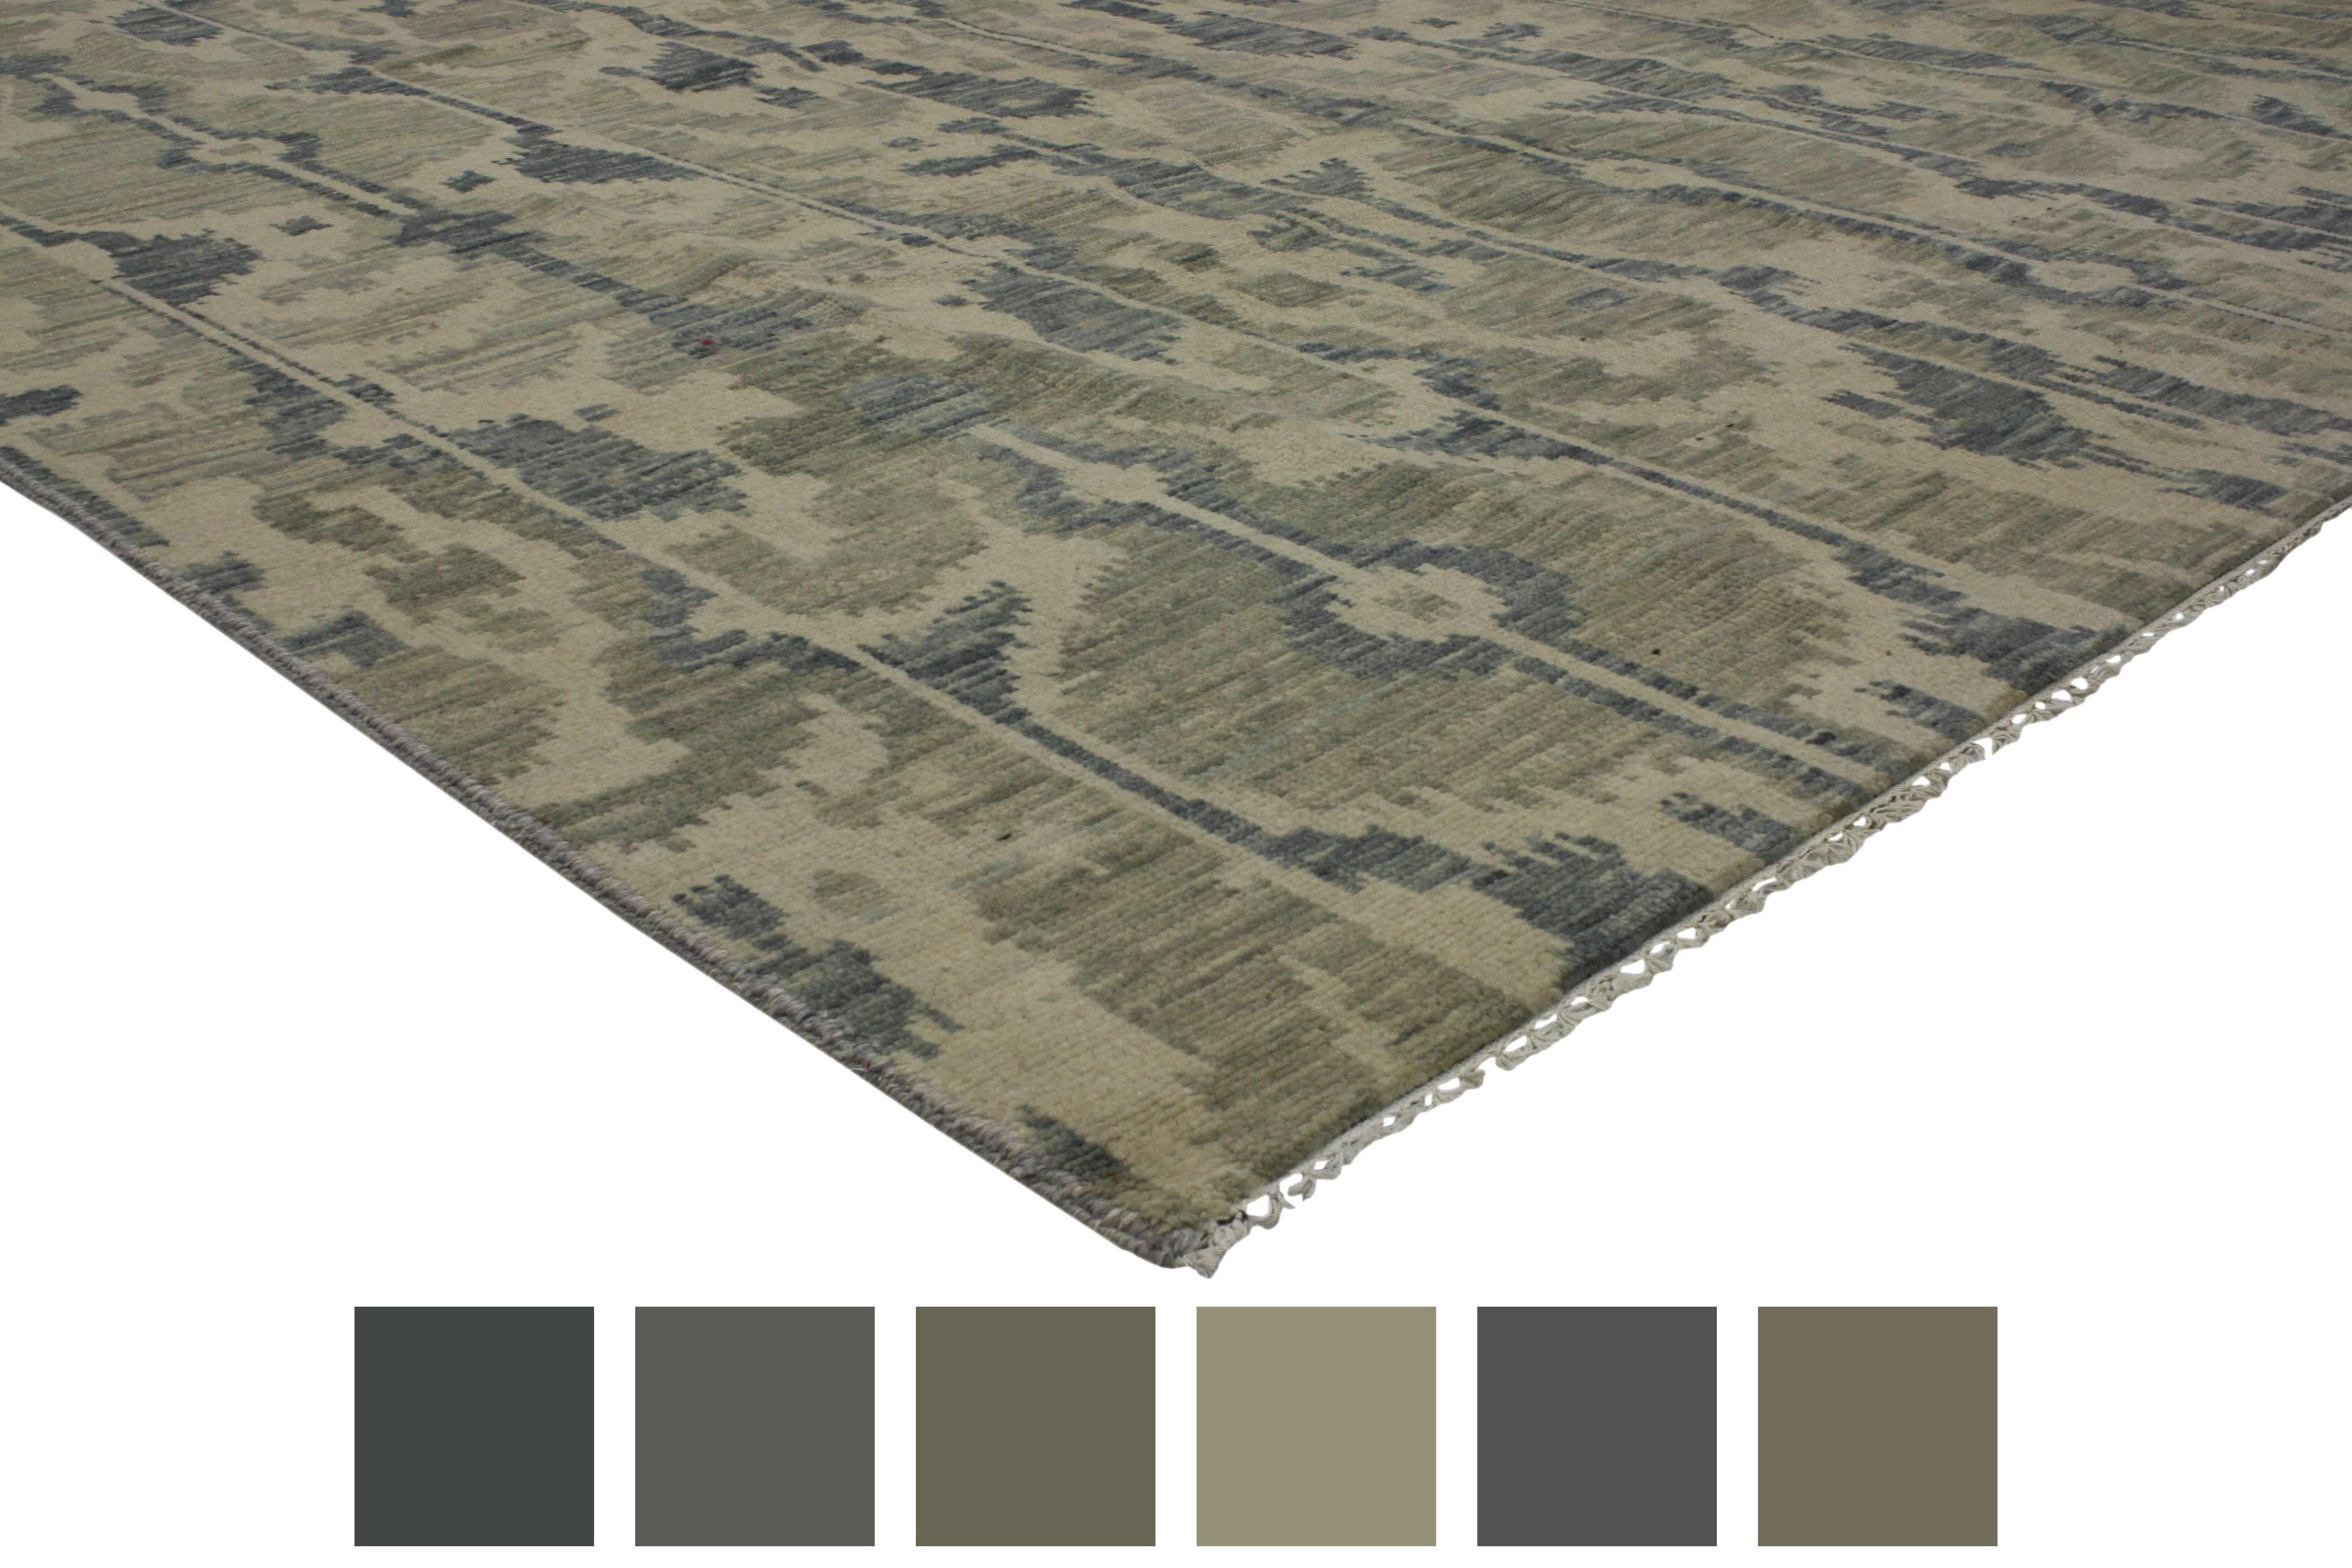 30271 New Transitional Ikat Rug with Modern Style and Warm Earth-Tone Colors 07’10 x 10’00. Balancing a timeless design with warm earth-tone colors, this hand-knotted wool transitional Ikat rug beautifully embodies a modern style with well-balanced